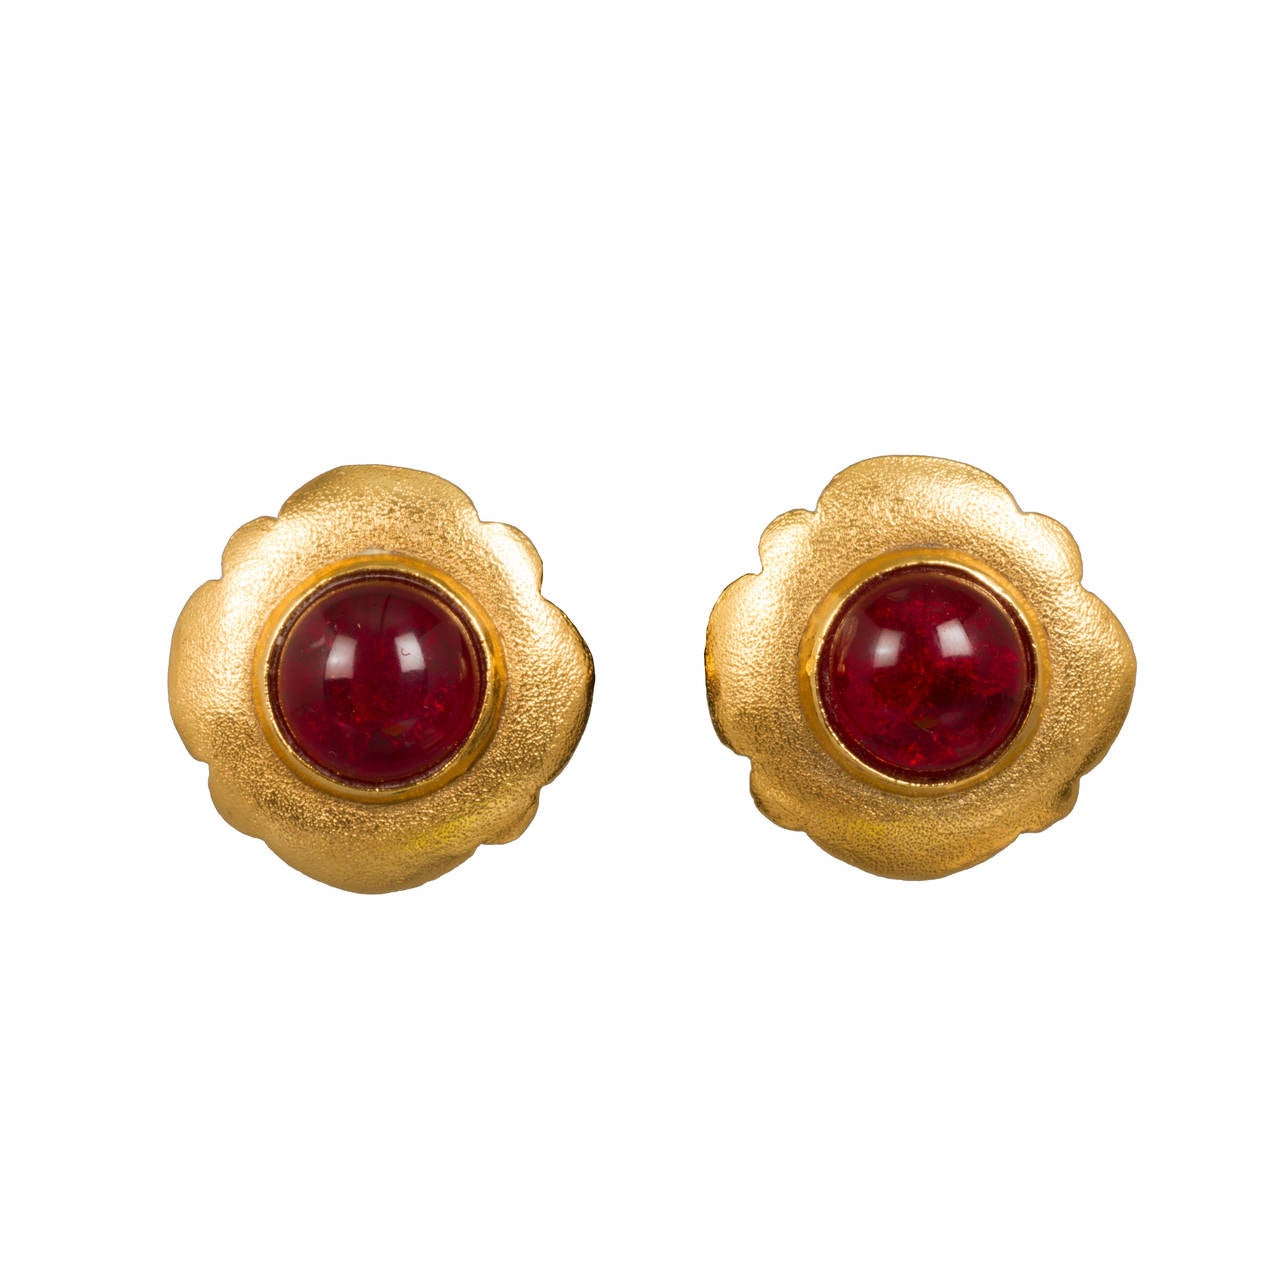 Vintage CHANEL Earrings with Gripoix Cabochon